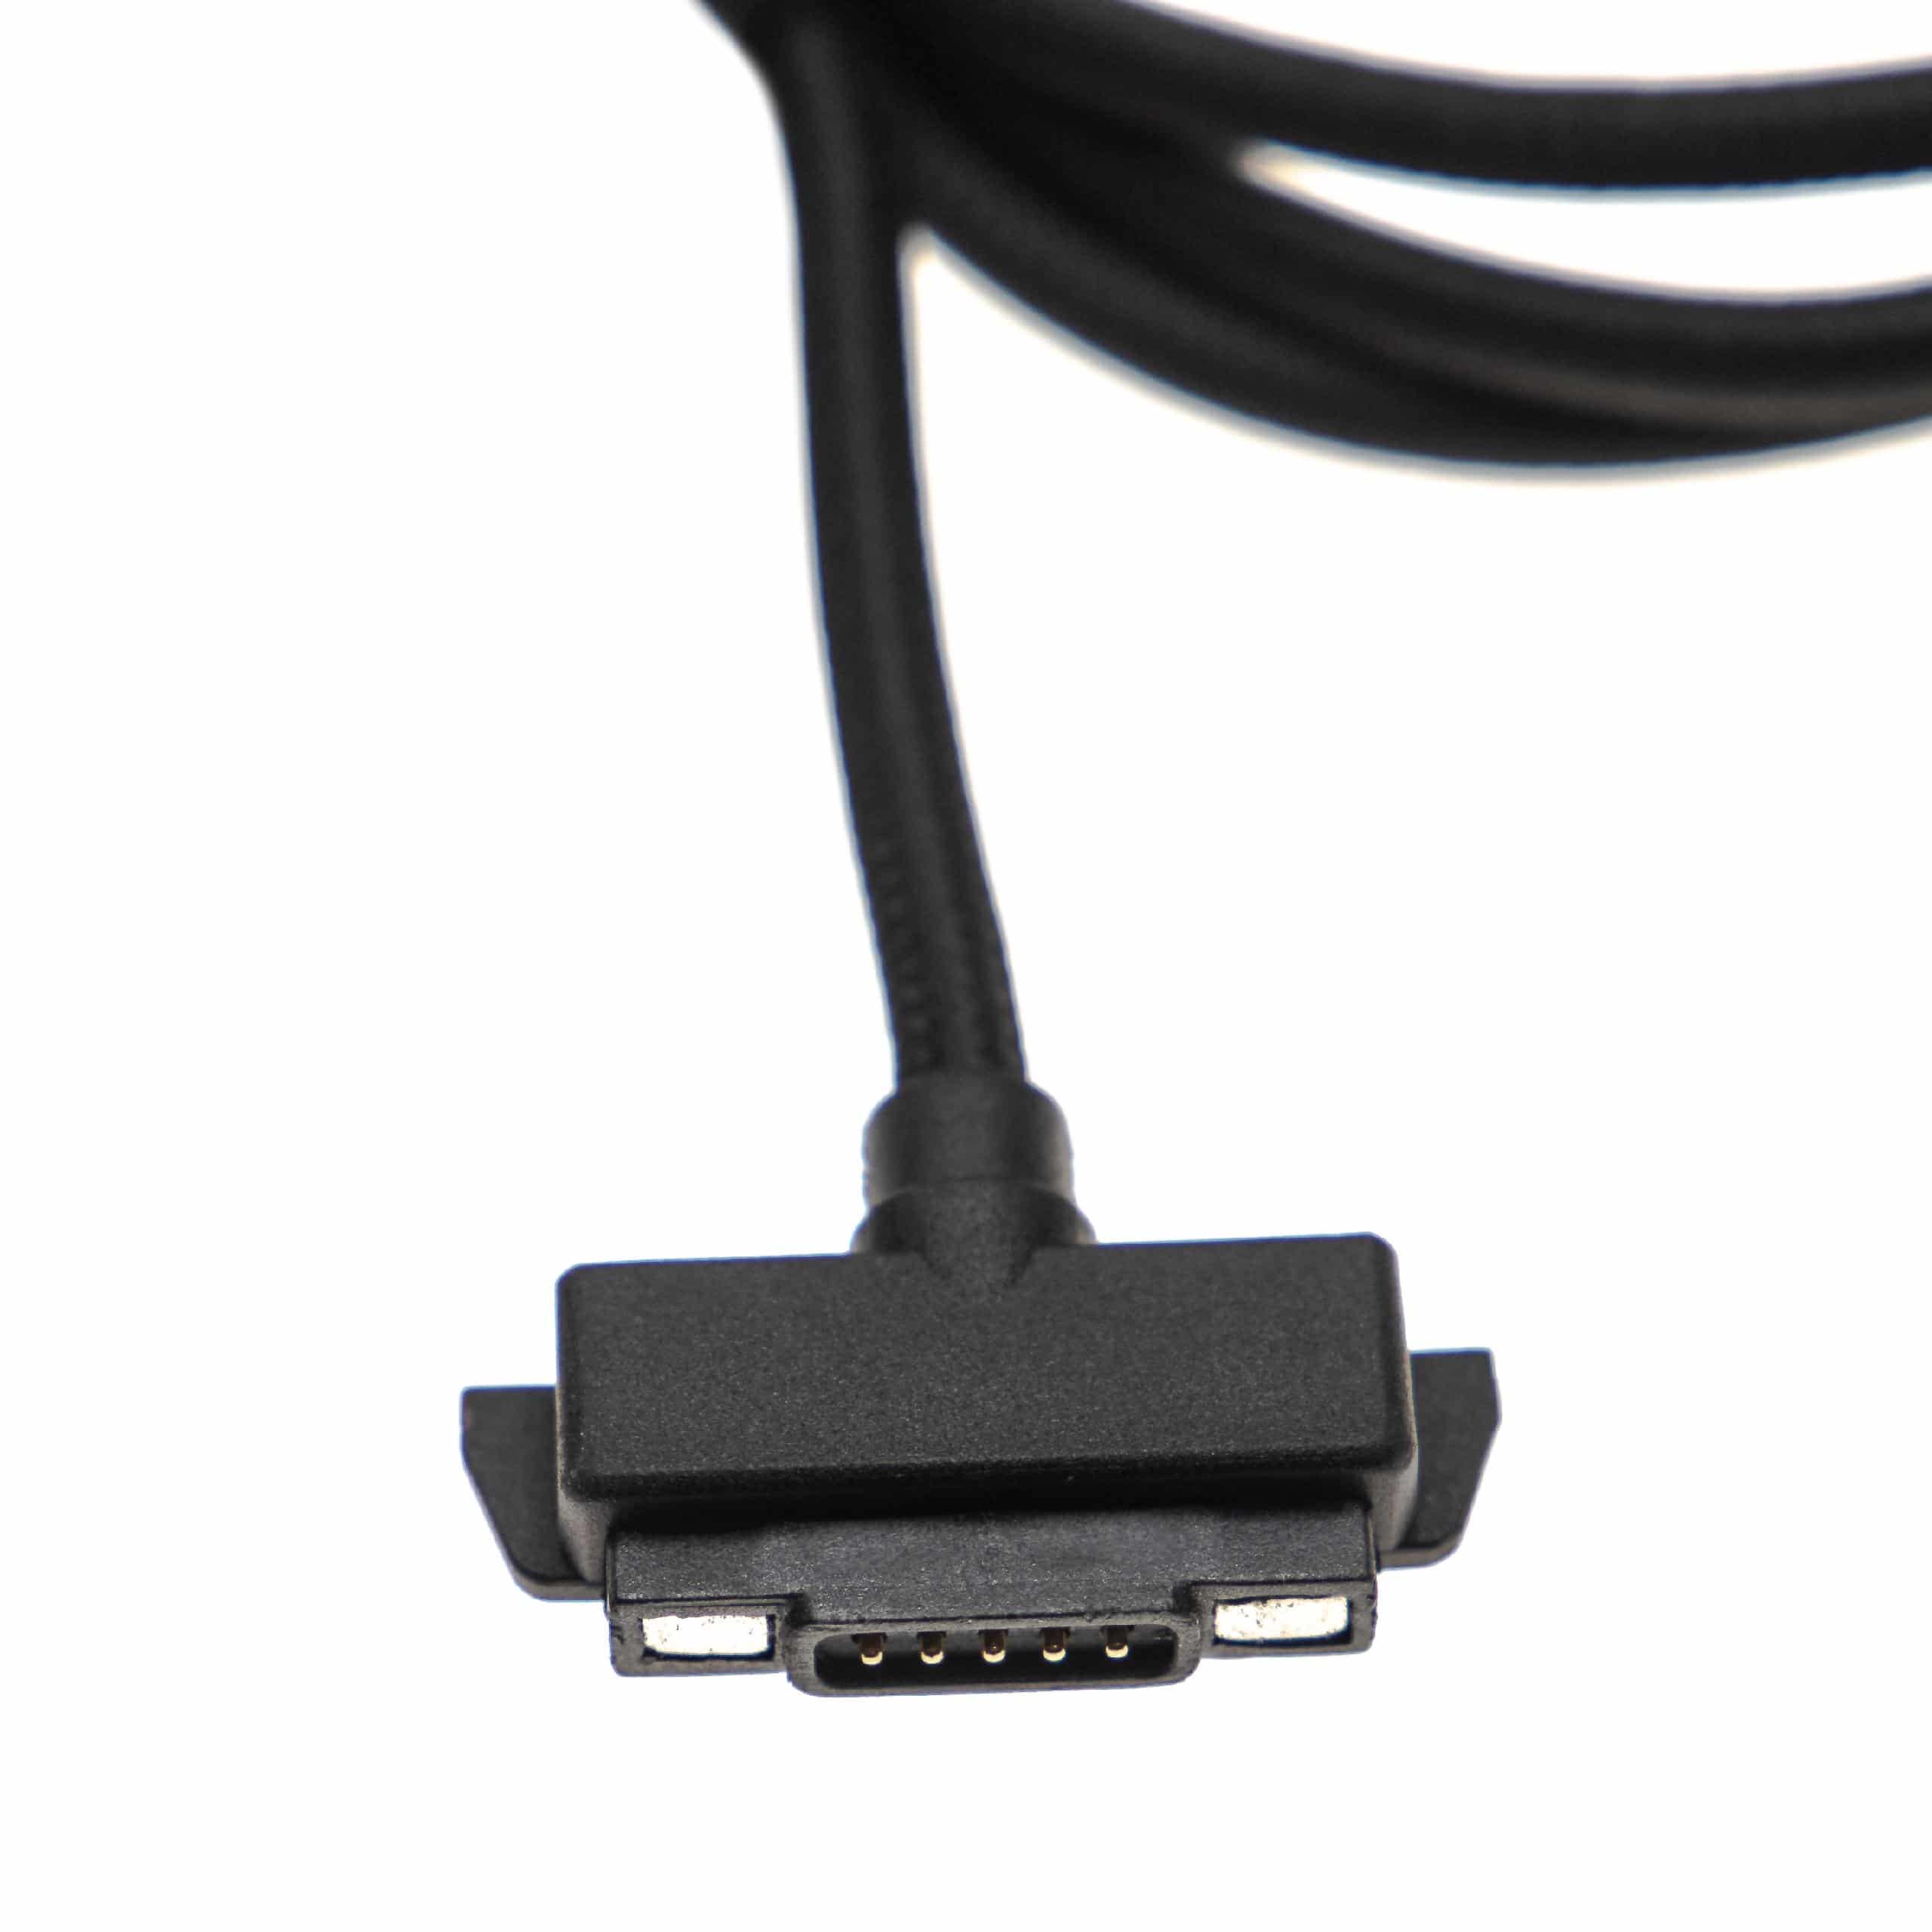 USB Charging Cable suitable for Sonim XP6 Smartphone, Mobile Phone, Magnetic